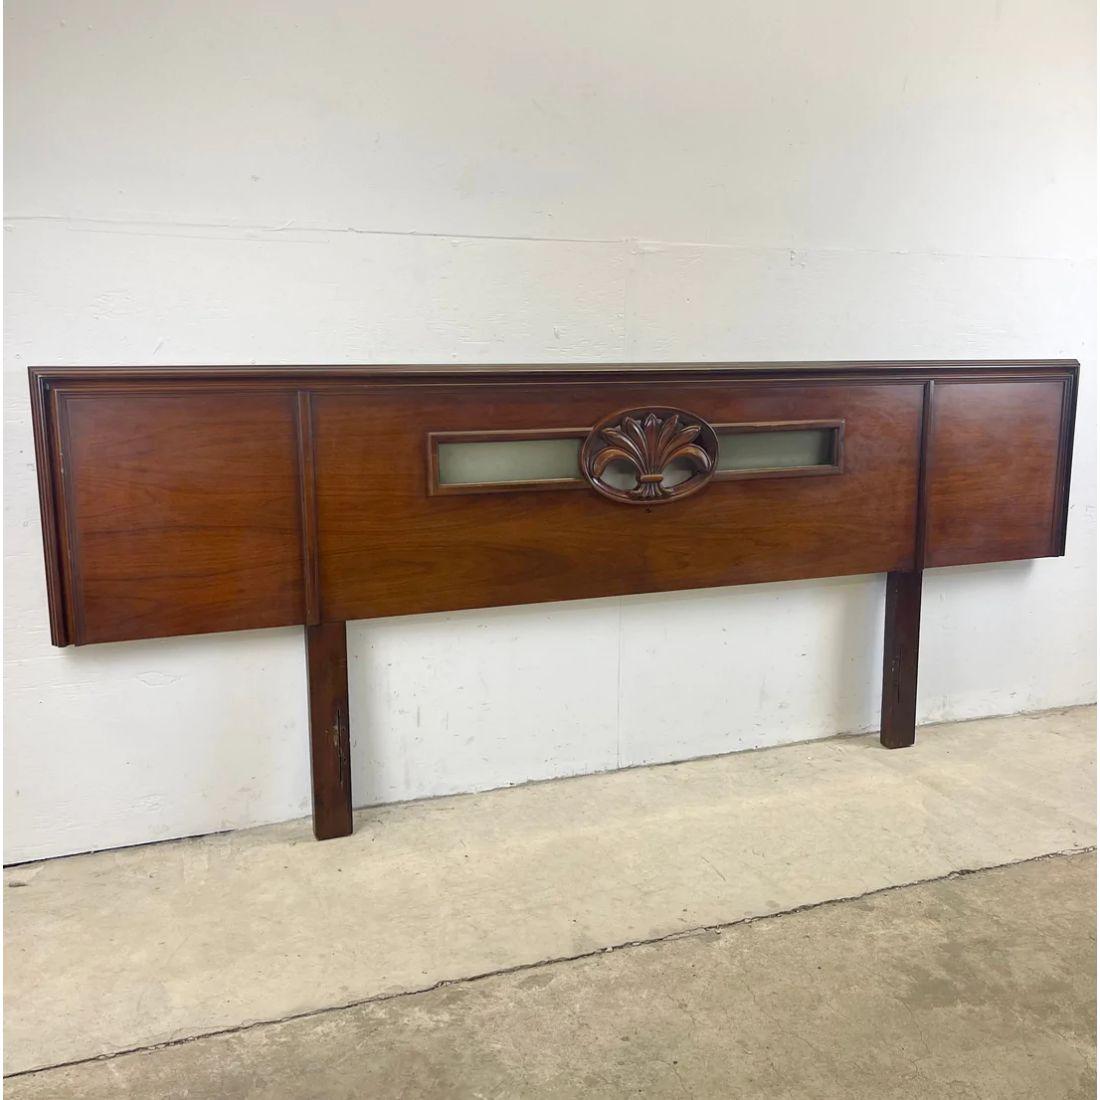 This over-sized mid-century modern headboard features a dark wood two tone finish with unique applied sculptural details and cutaway light boxes. The 96.25 inch wide side makes this an impressive focal point to any king size bedroom set, matching